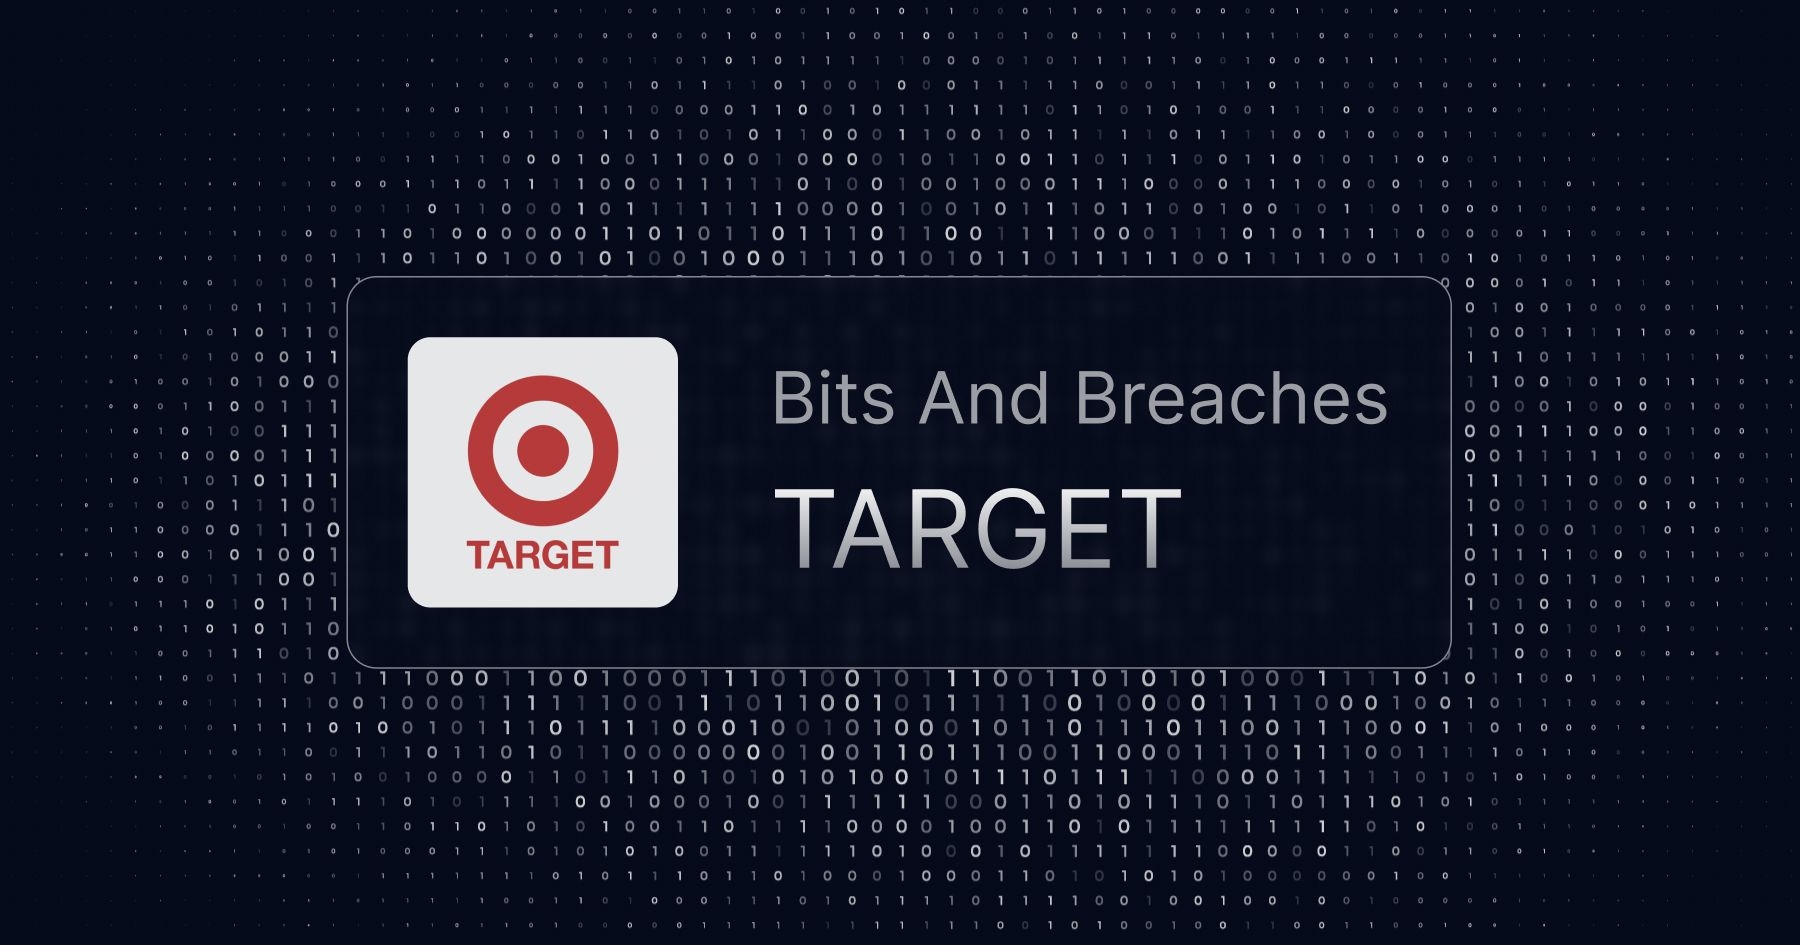 Bits and Breaches - Target Data Breach 2013  